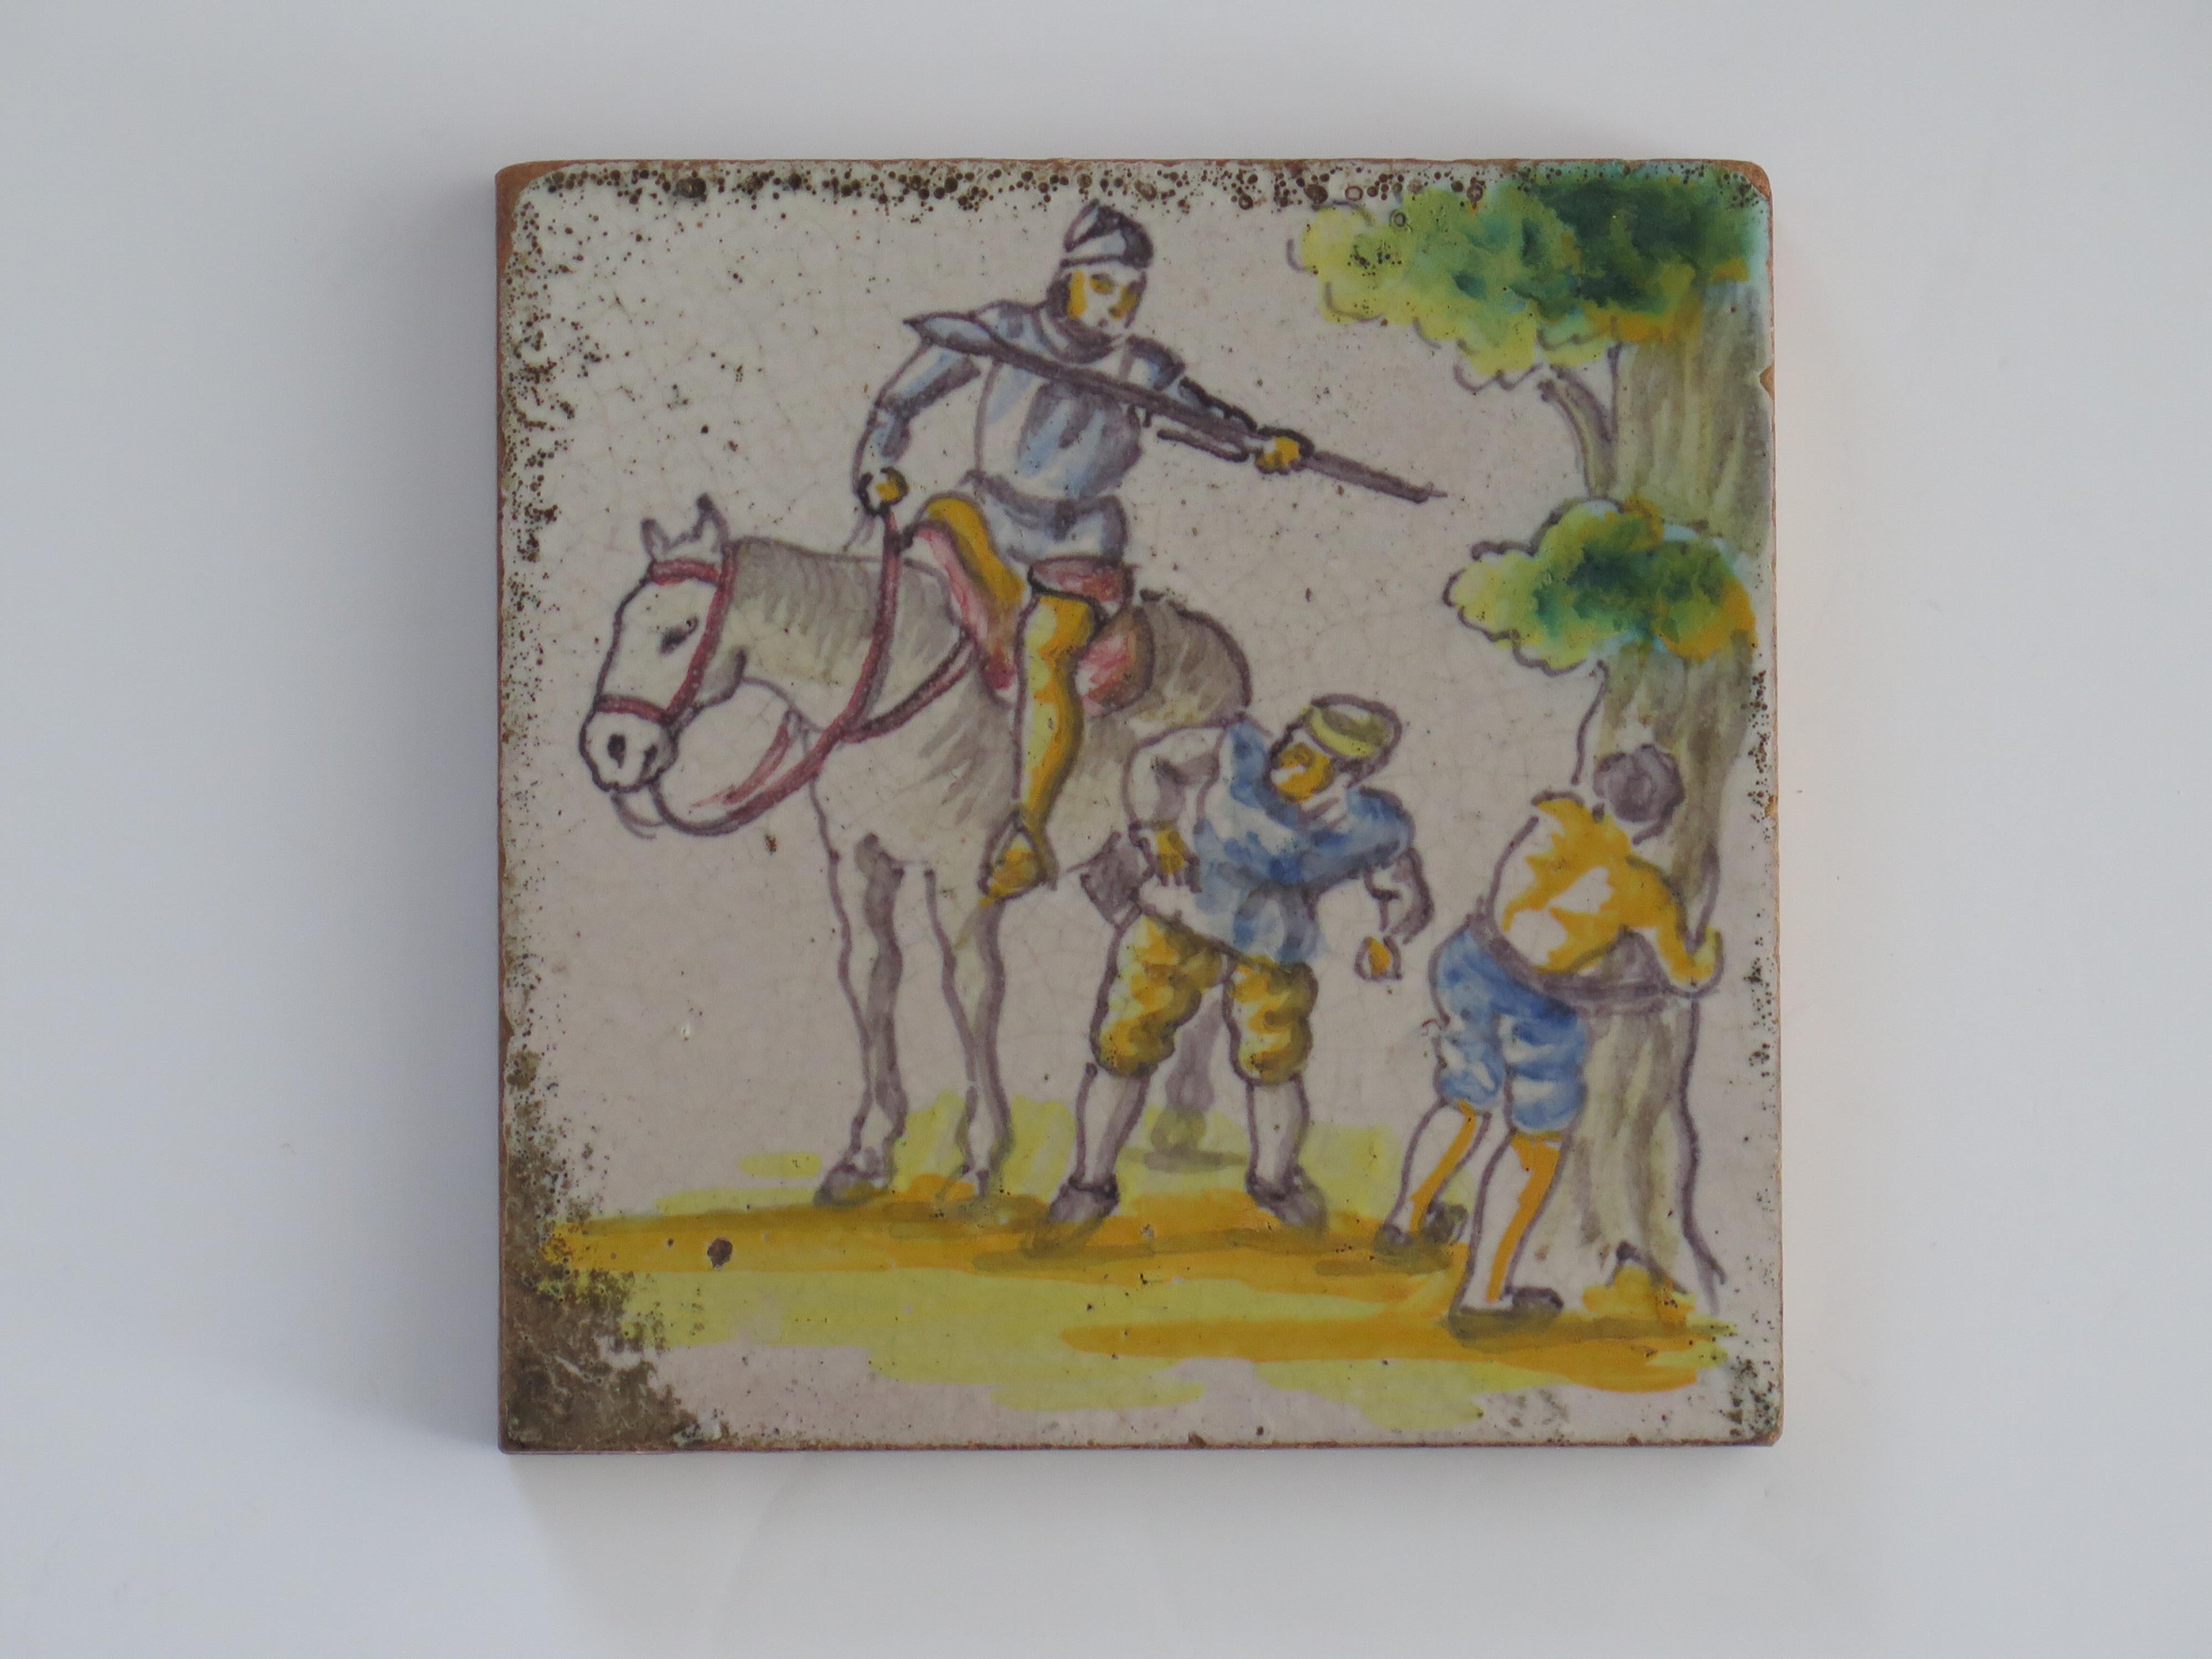 This is a very attractive Delft Polychrome, hand painted earthenware ceramic wall tile dating to the late 18th Century.

The tile is 5.5 inches ( 14cm) square and over 1/2 inches thick. 

The tile is hand painted with polychrome enamels of blue,